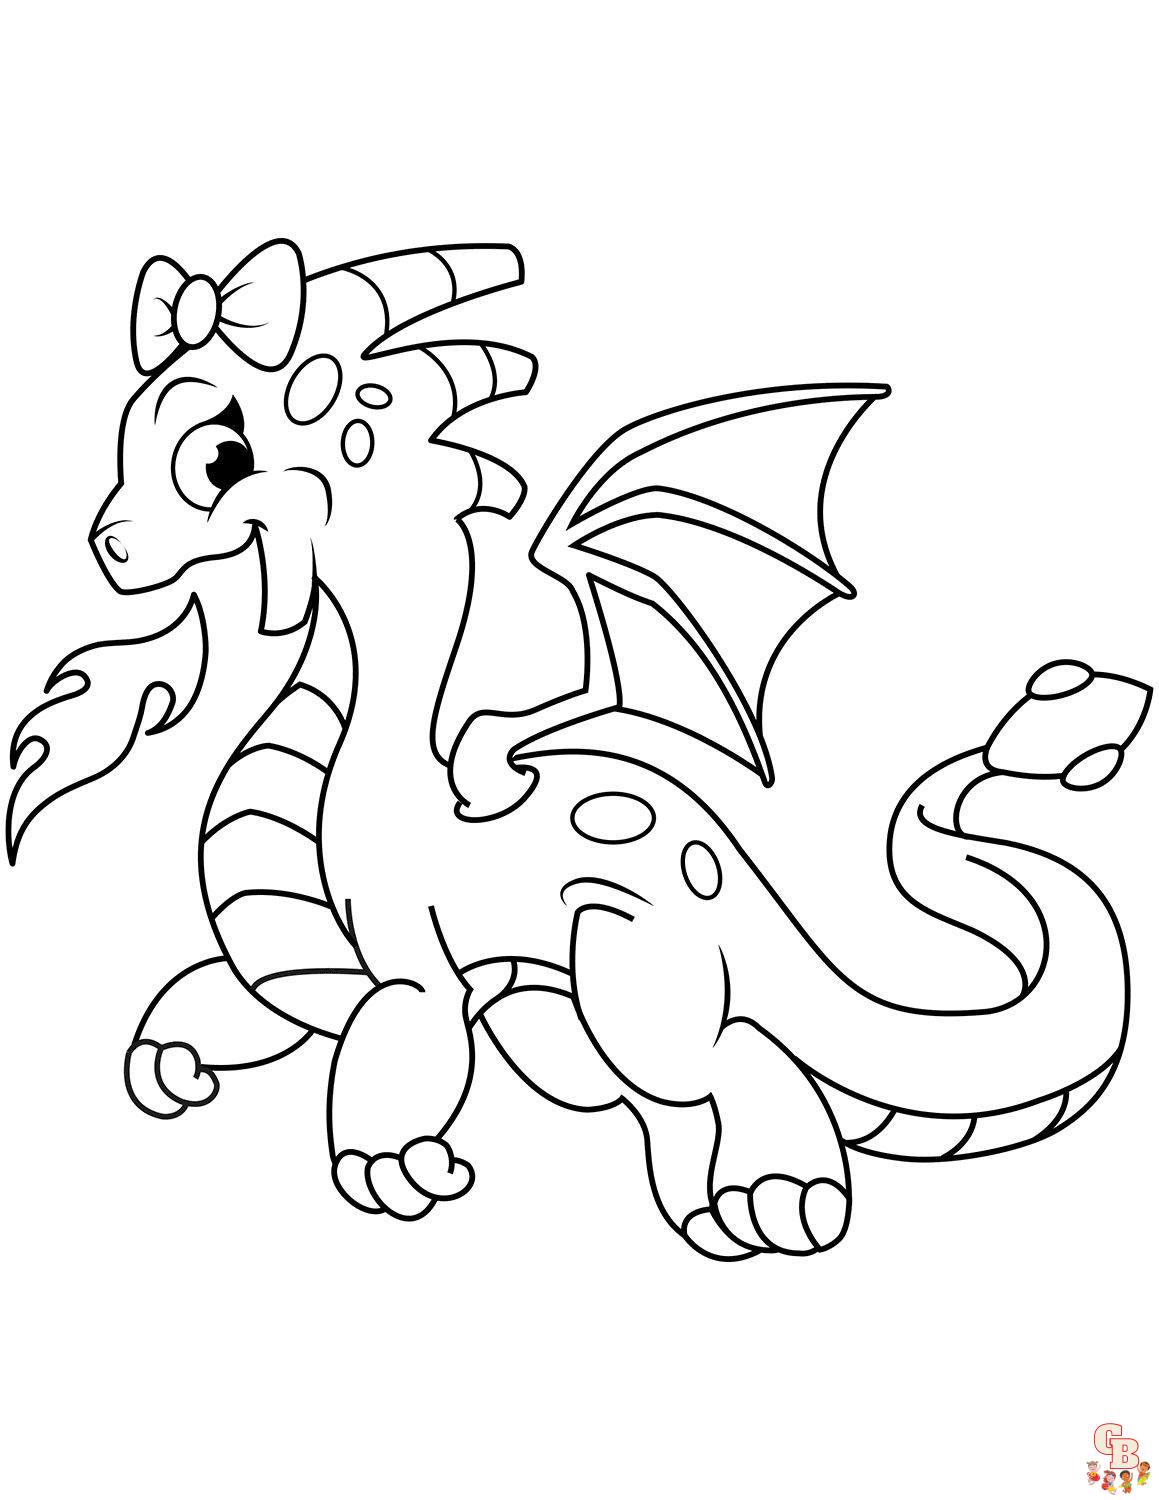 Dragon Egg Coloring Pages 3